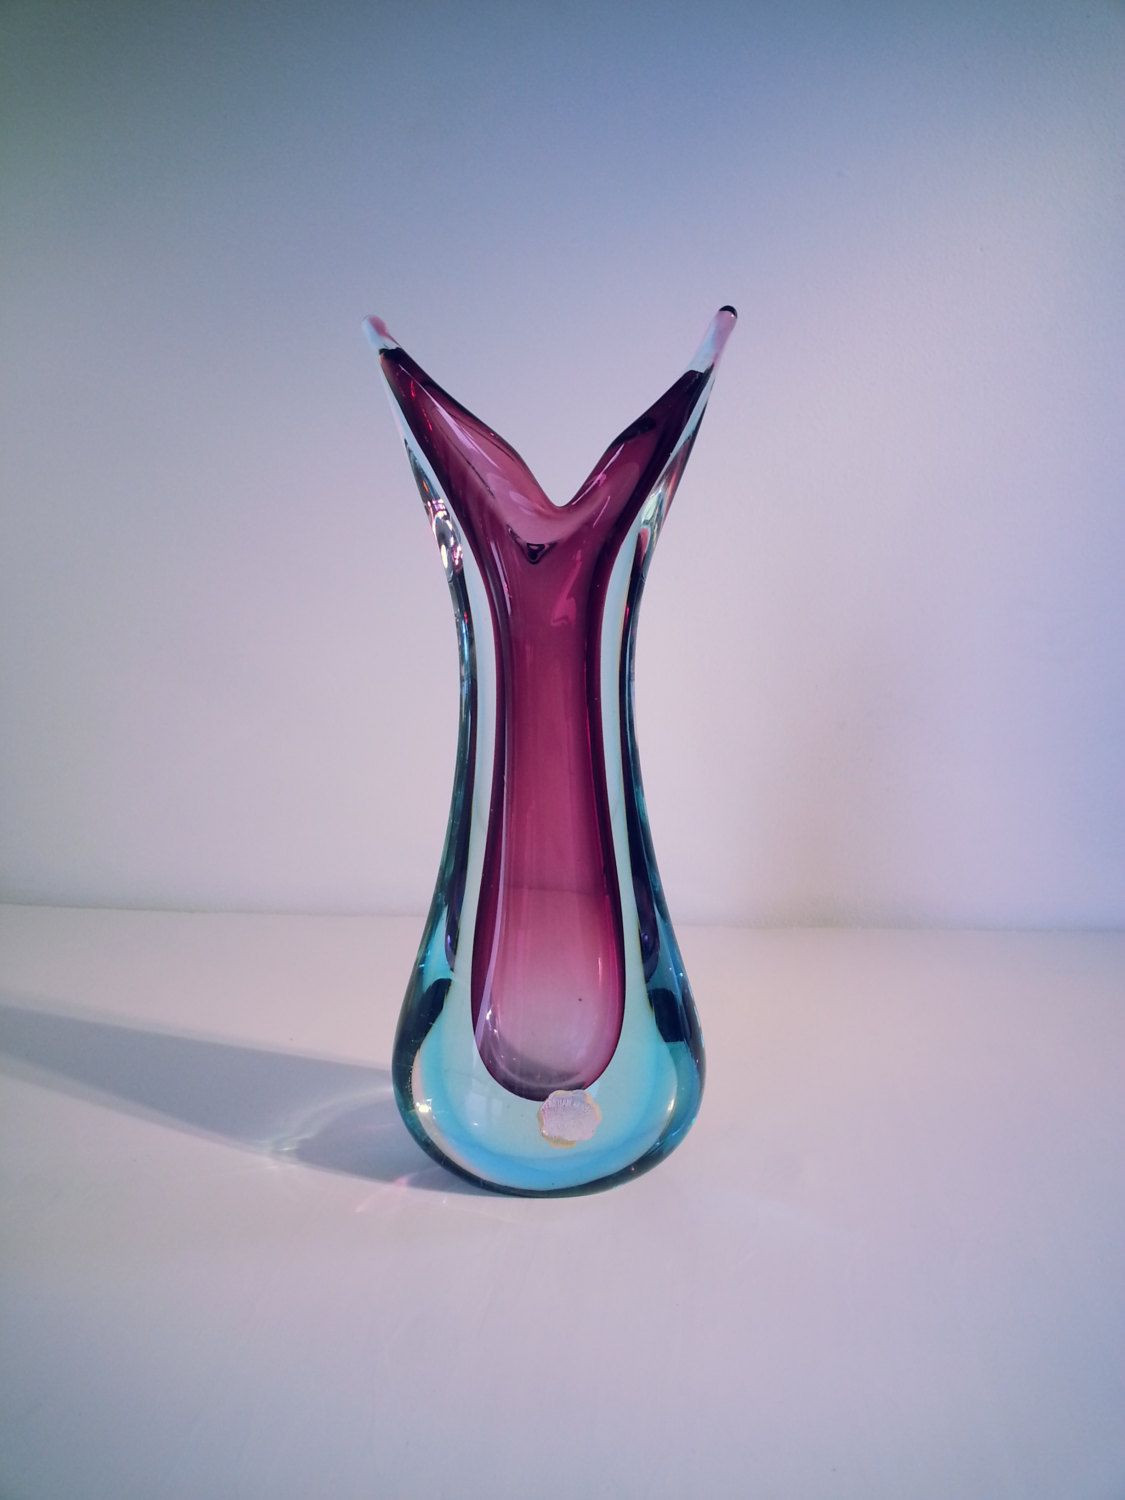 17 Nice Amber Crackle Glass Vase 2024 free download amber crackle glass vase of image of italian glass vase vases artificial plants collection throughout italian glass vase photos murano sommerso genuine venetian glass 1950 s 1960s purple blu